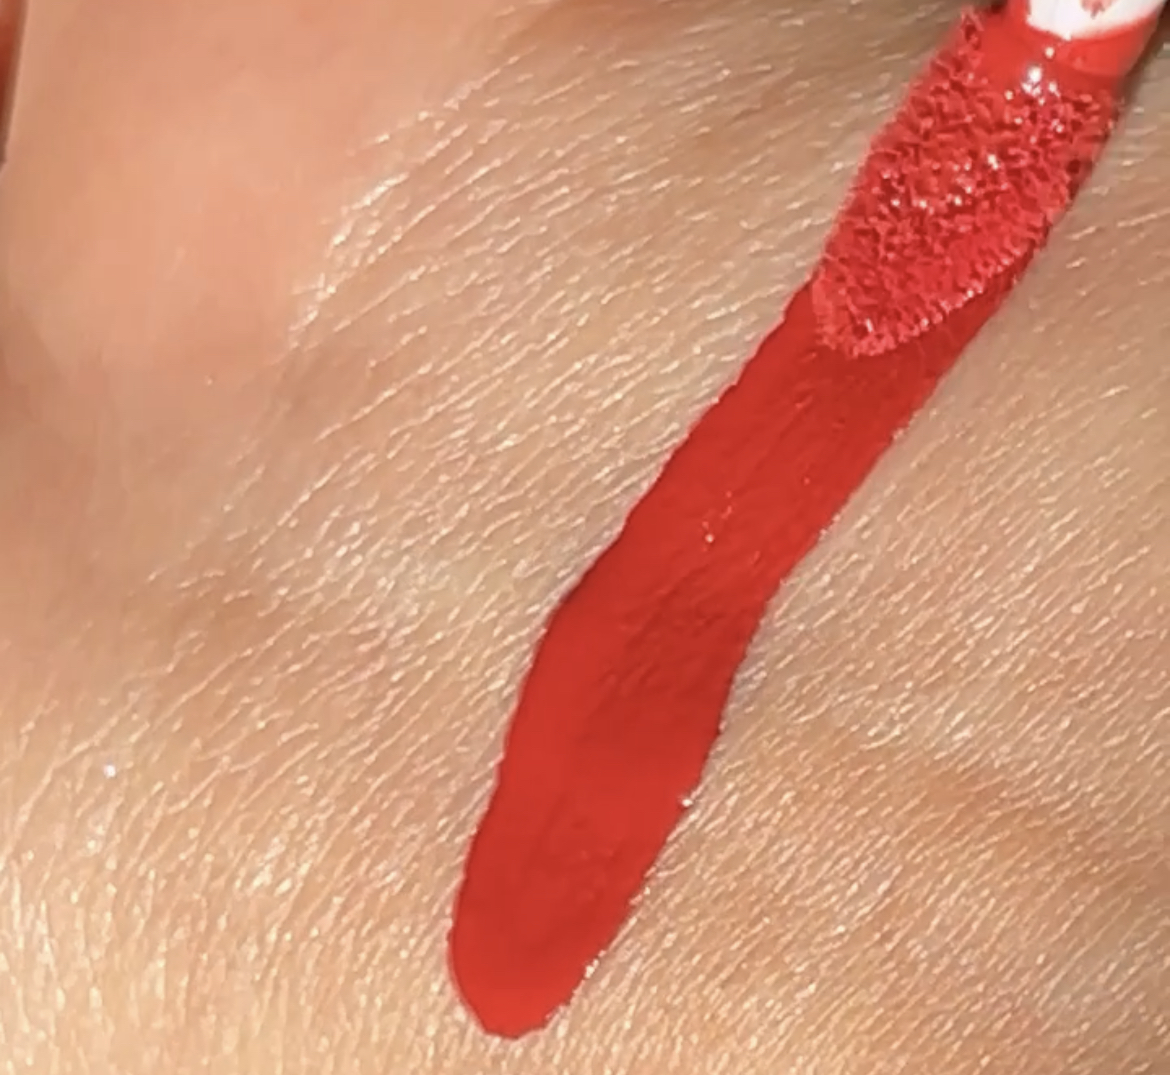 ATHR Beauty Radiant Ruby Lip Creme swatches